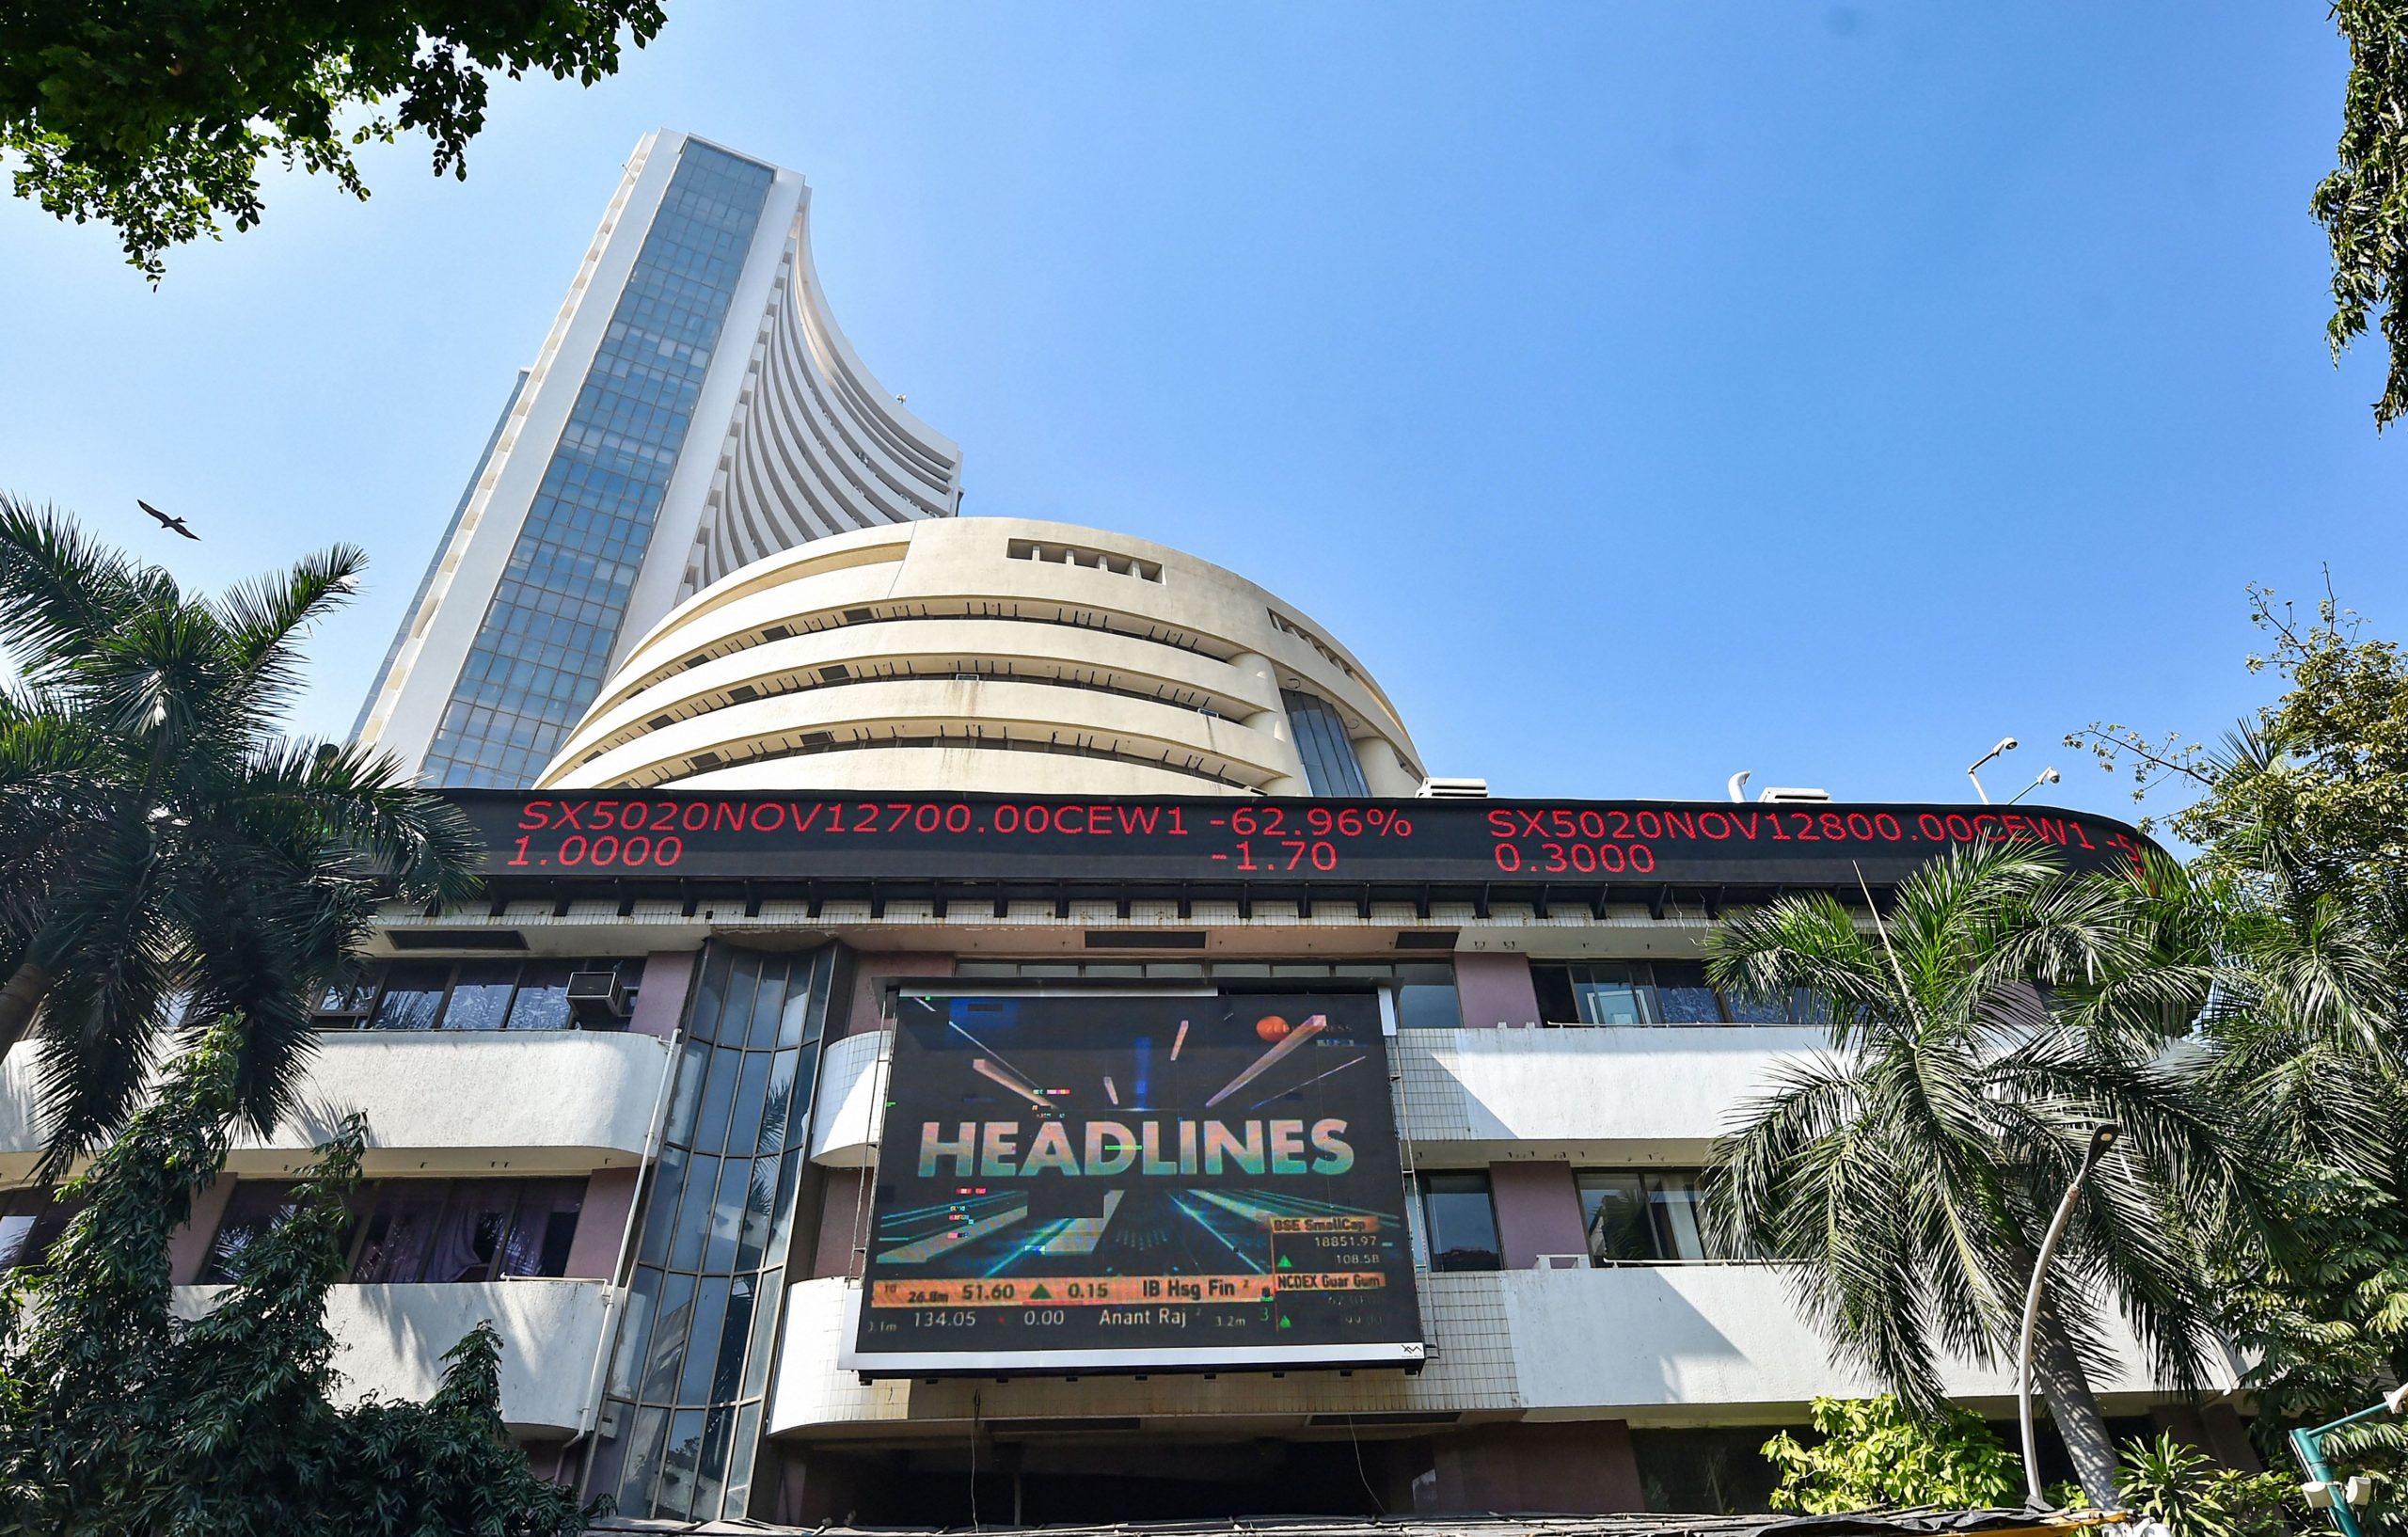 Trending Stocks: LIC, Zee, ICICI, VST, IEX and others in news today